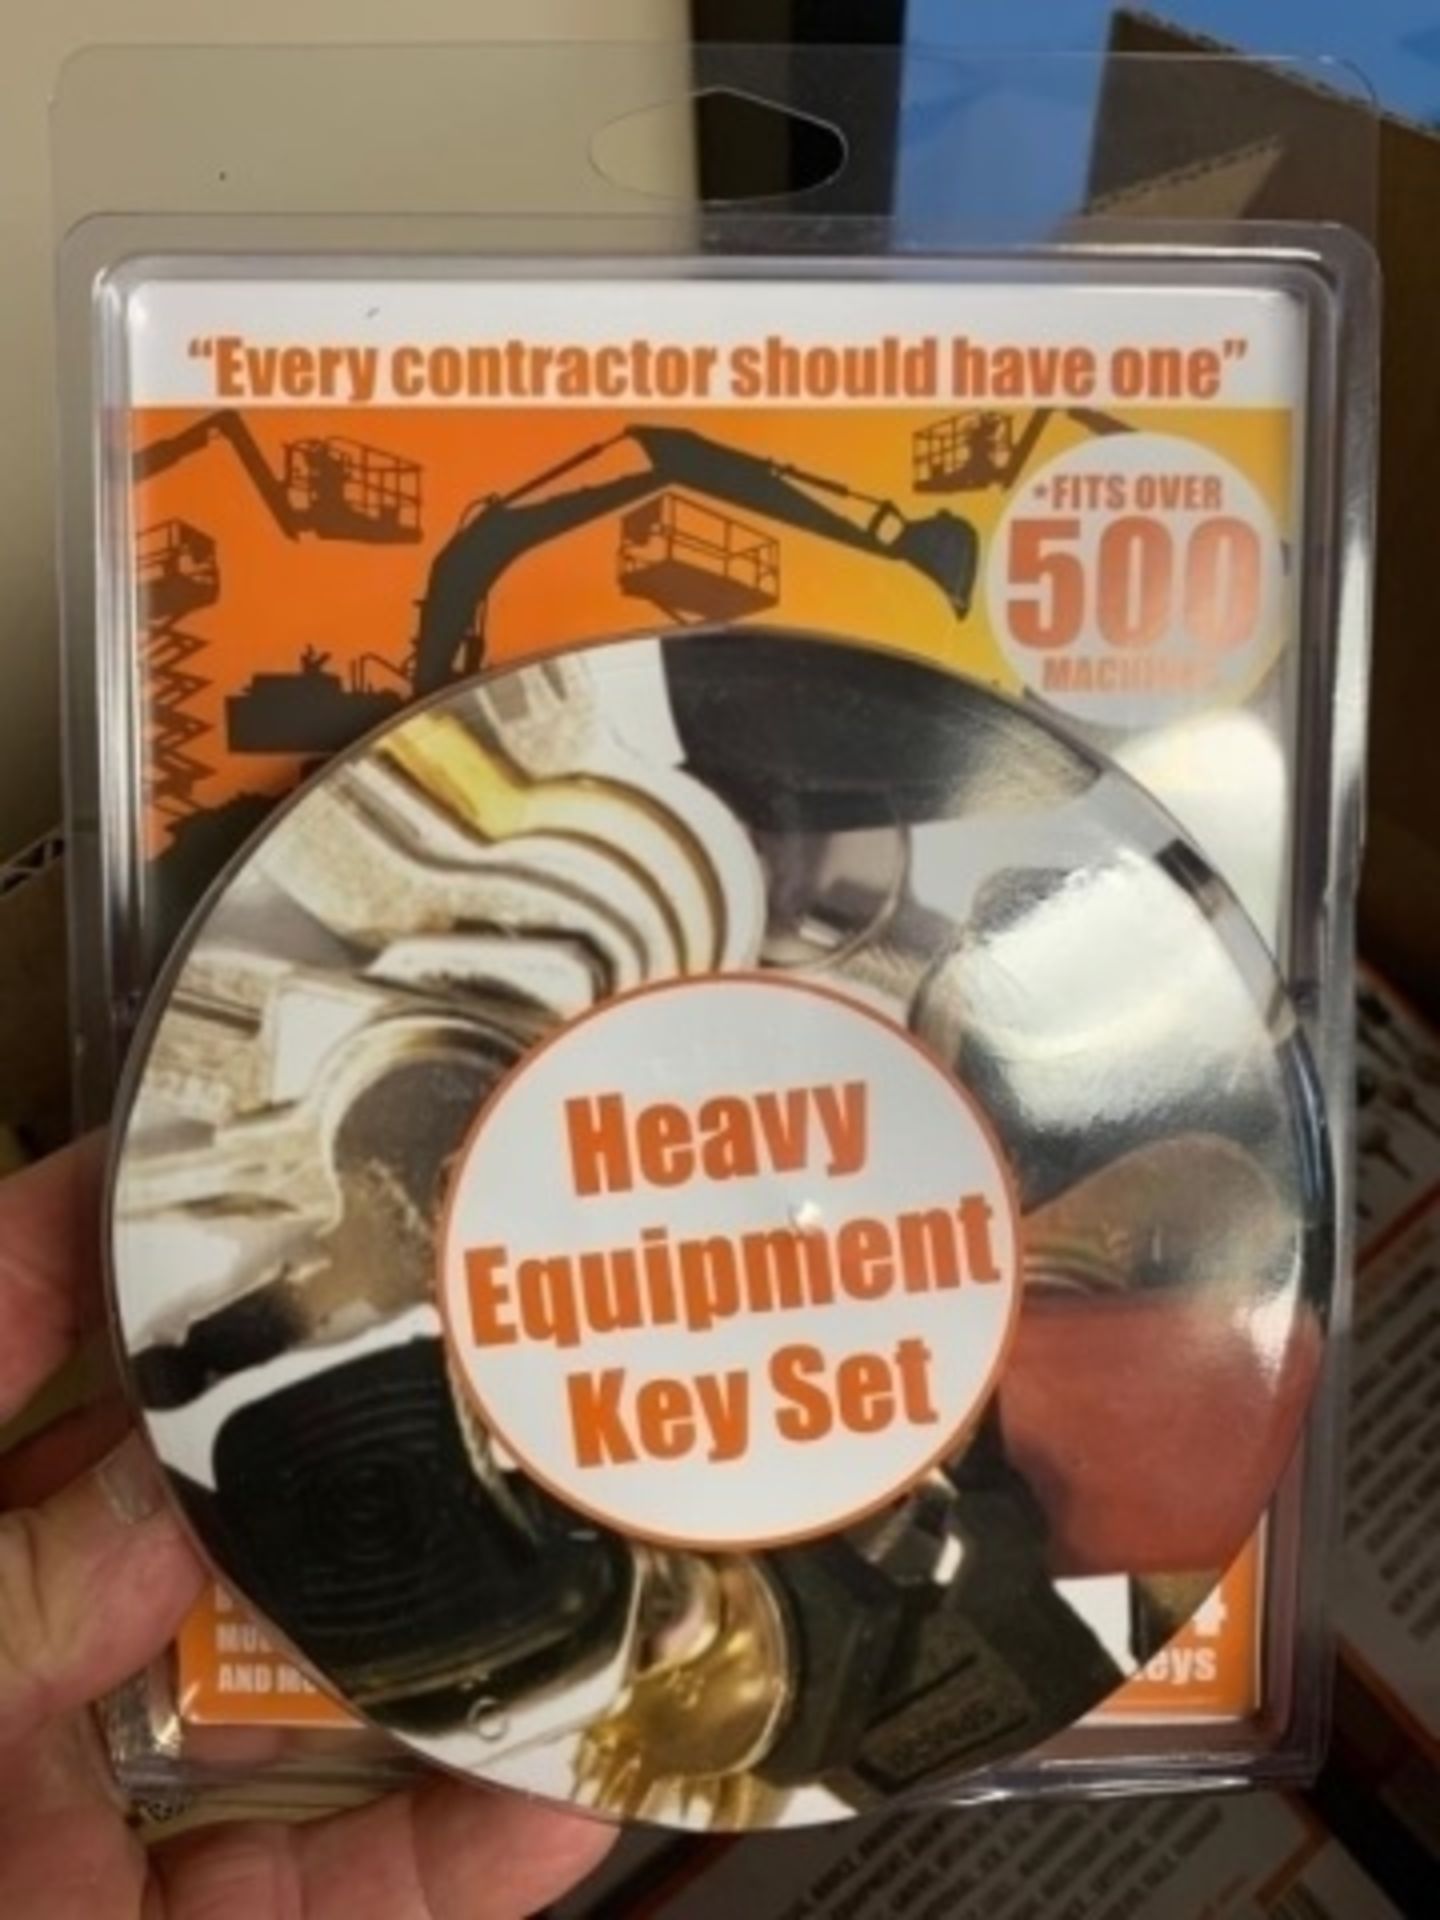 New Unused Heavy Equipment 24-Key Set, Fits Over 500 Different Machines - Image 2 of 6